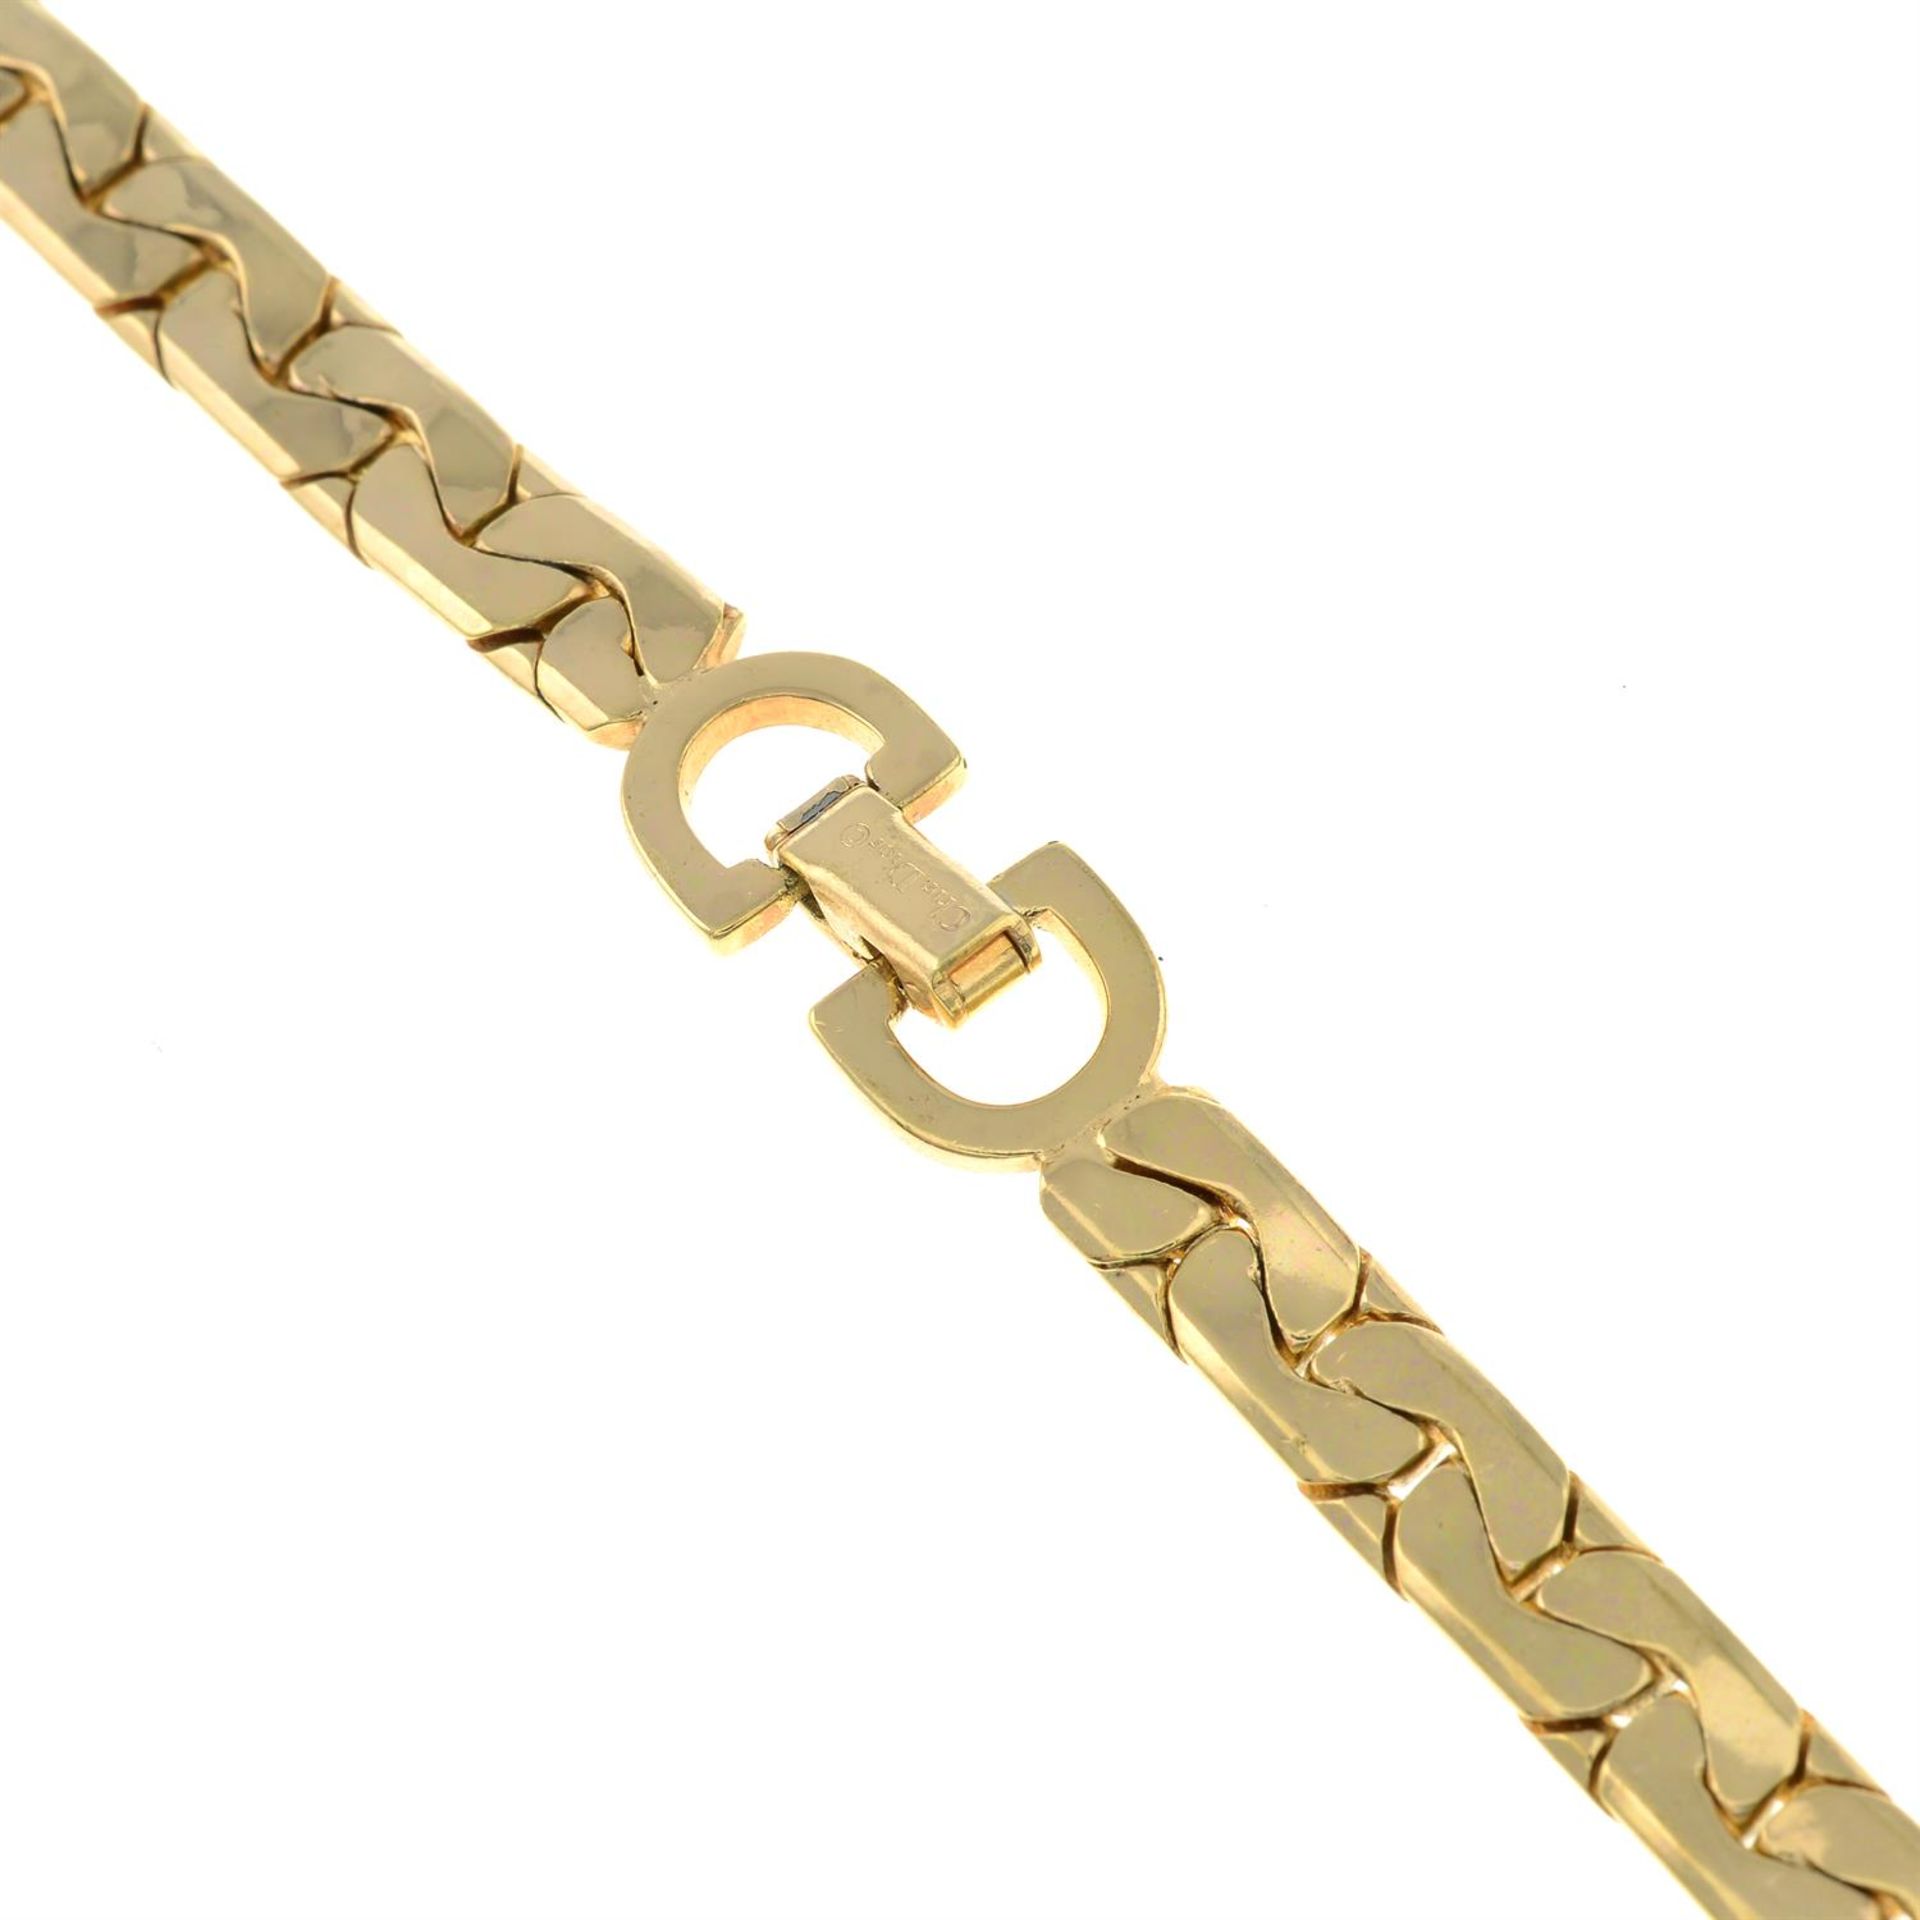 CHRISTIAN DIOR - a snake chain necklace. - Image 3 of 3